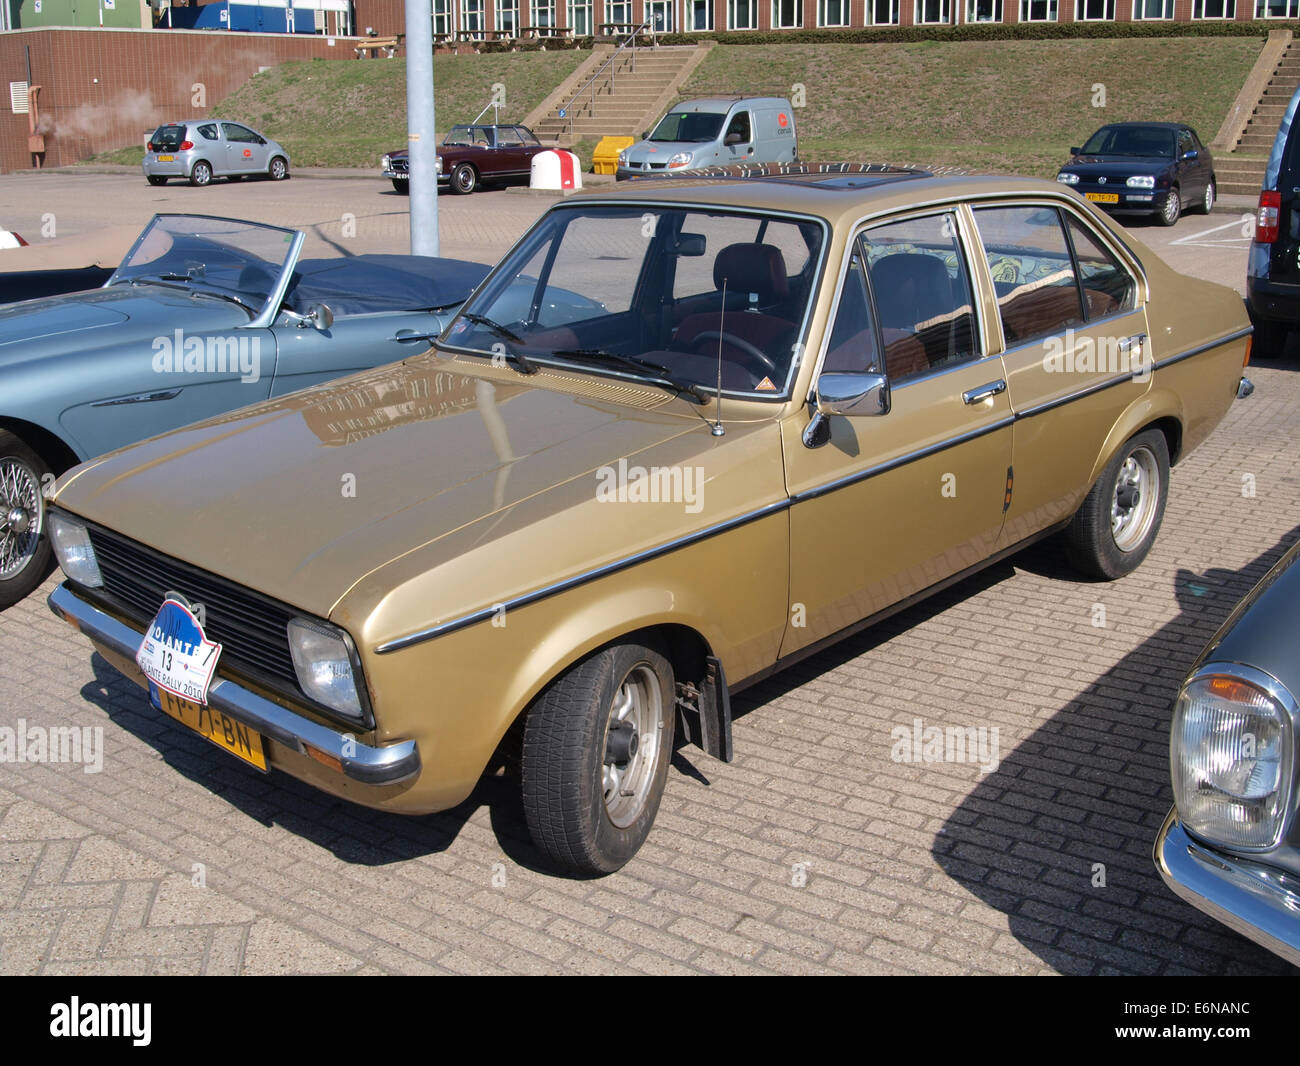 Ford ESCORT 1300 GL, licence FP-71-BN, pic2 Stock Photo